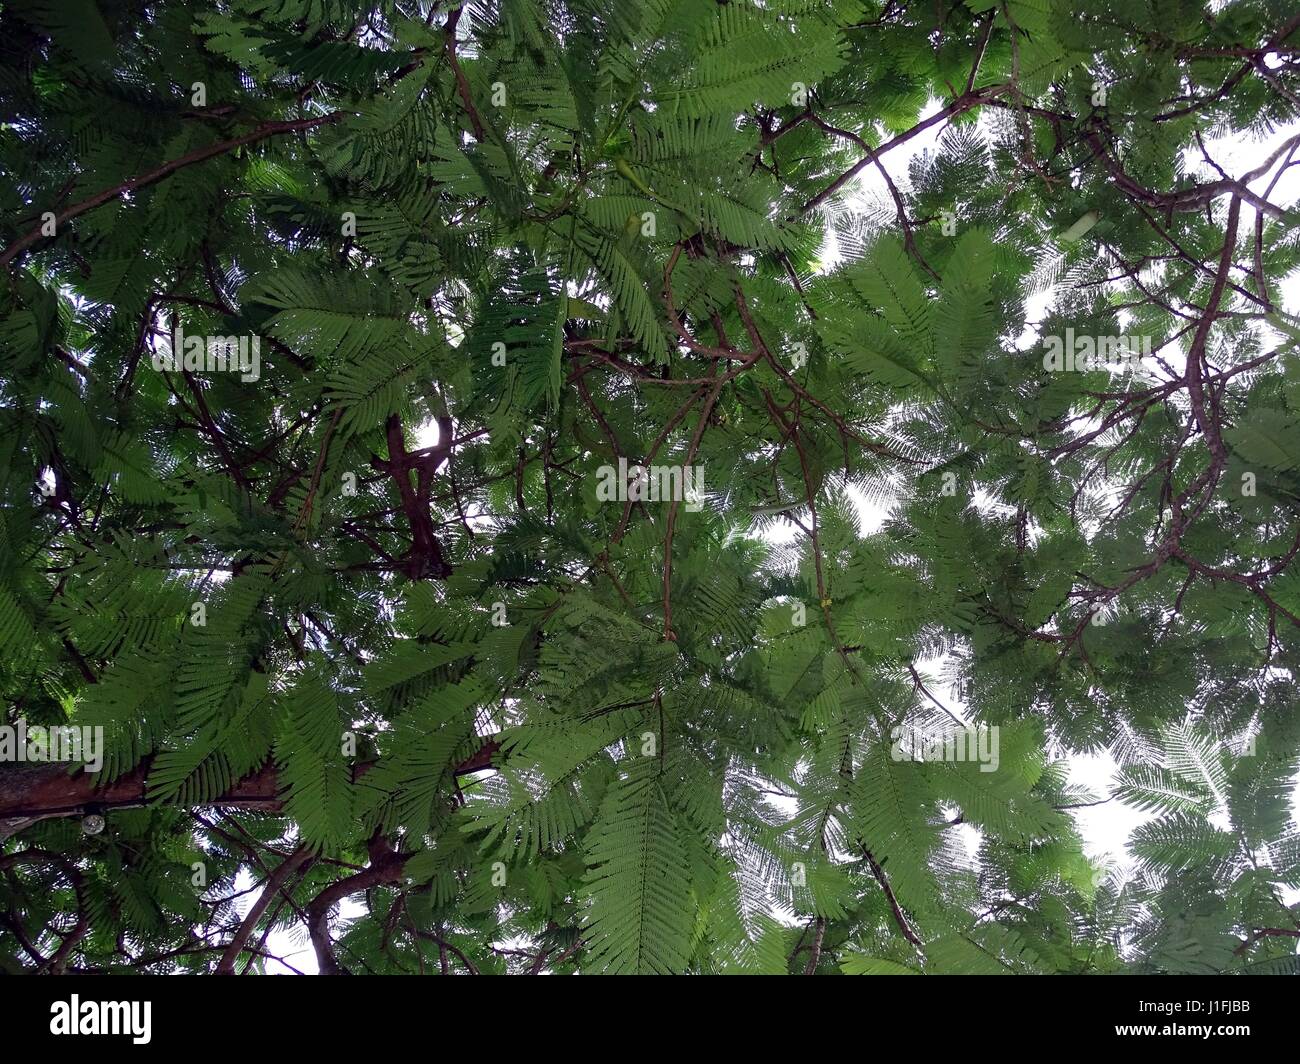 An underside view of a tree with fern like leaves Stock Photo